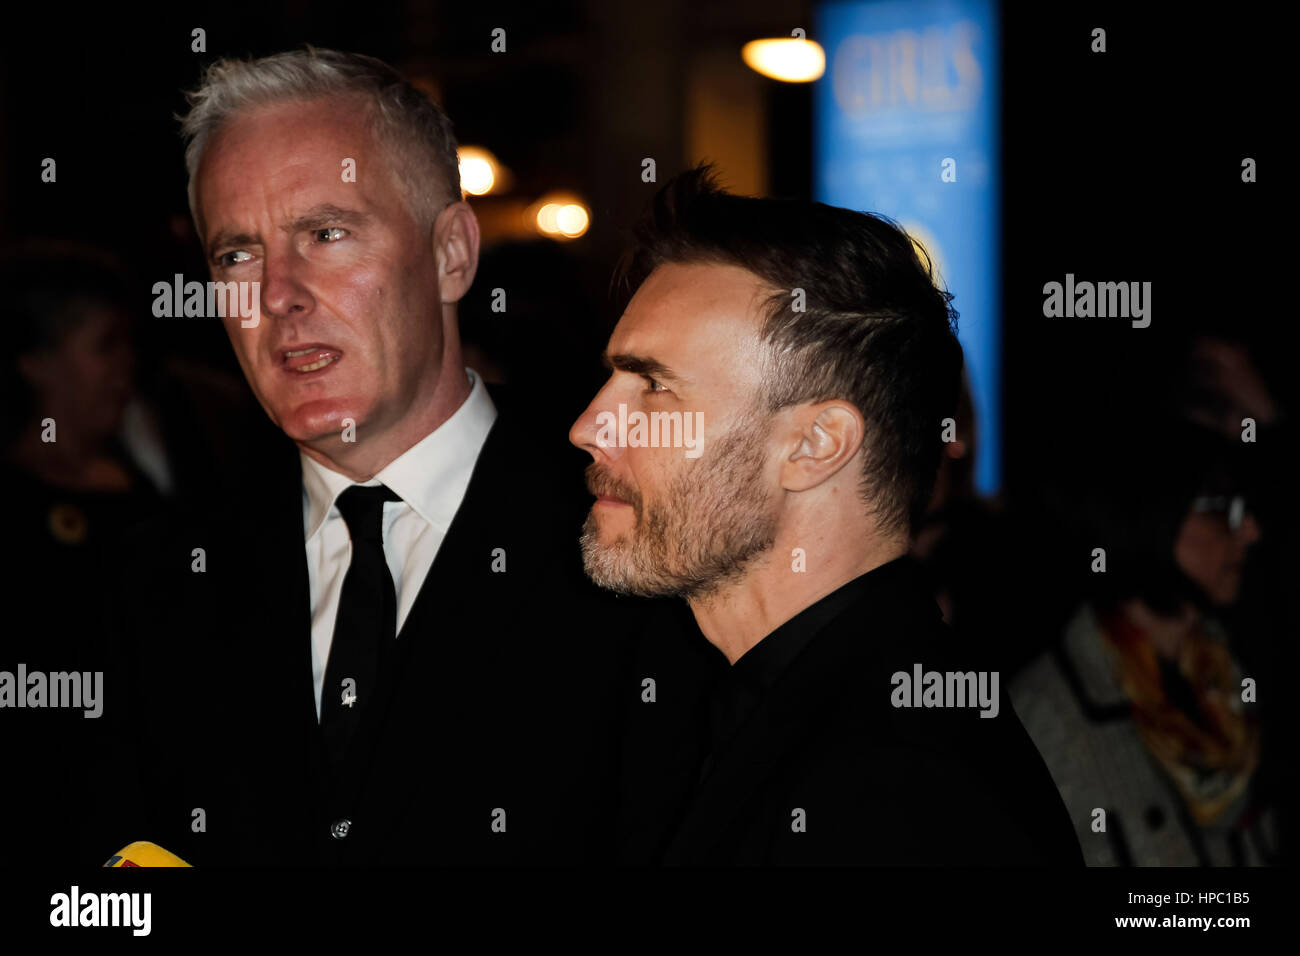 See Who's Starring in New Production of Gary Barlow and Tim